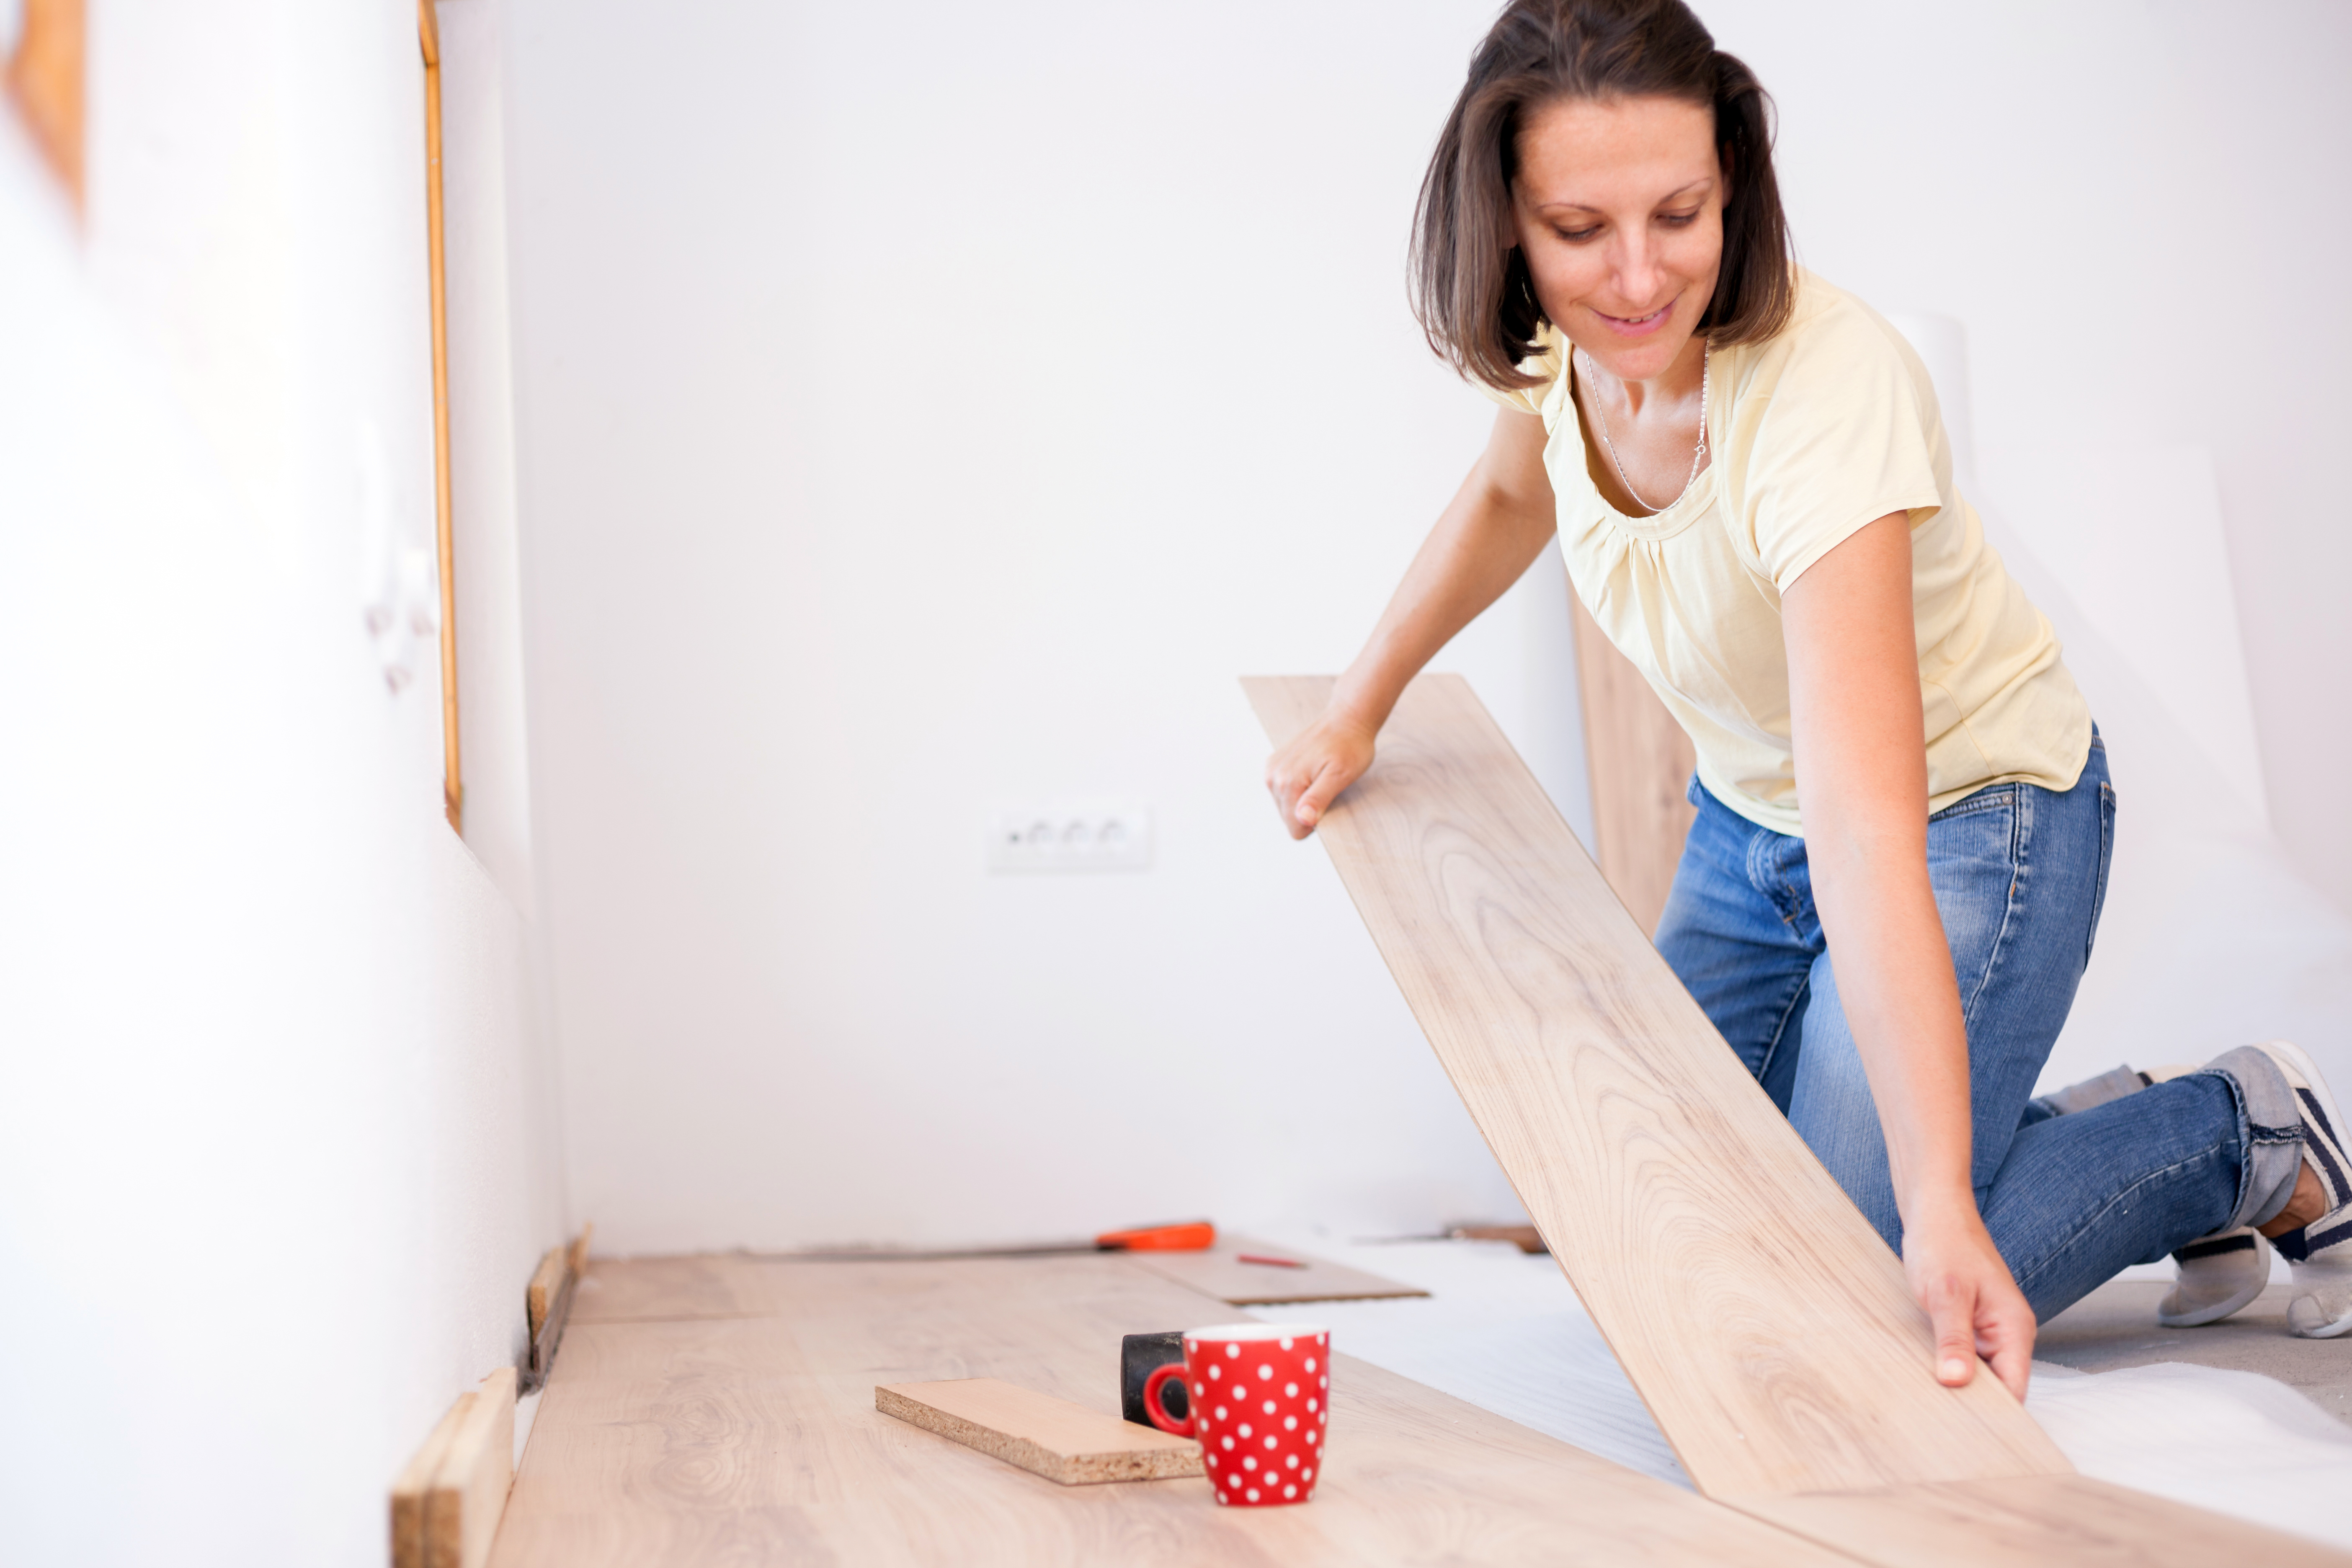 The Easiest Flooring To Install Our, Which Laminate Flooring Is Easiest To Install